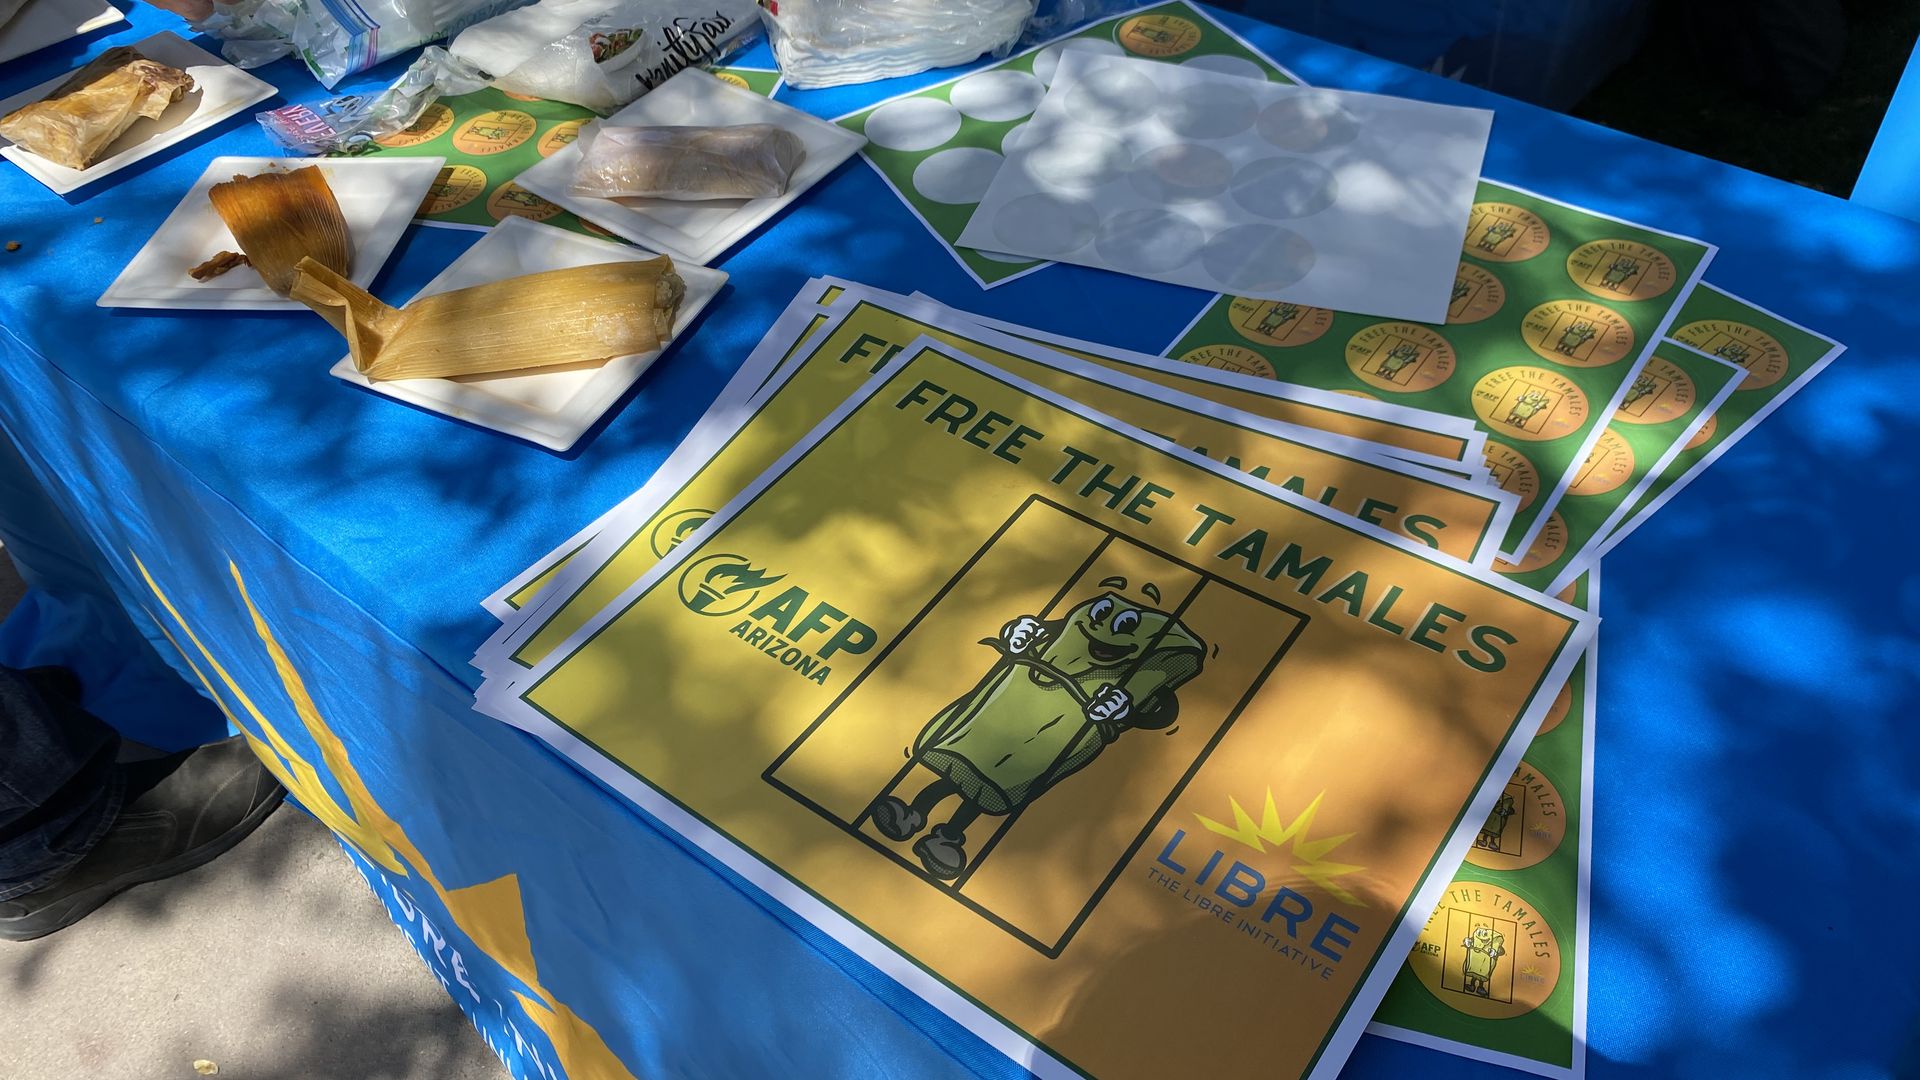 A table filled with tamales, sheets of stickers and yellow signs that read Free The Tamales.